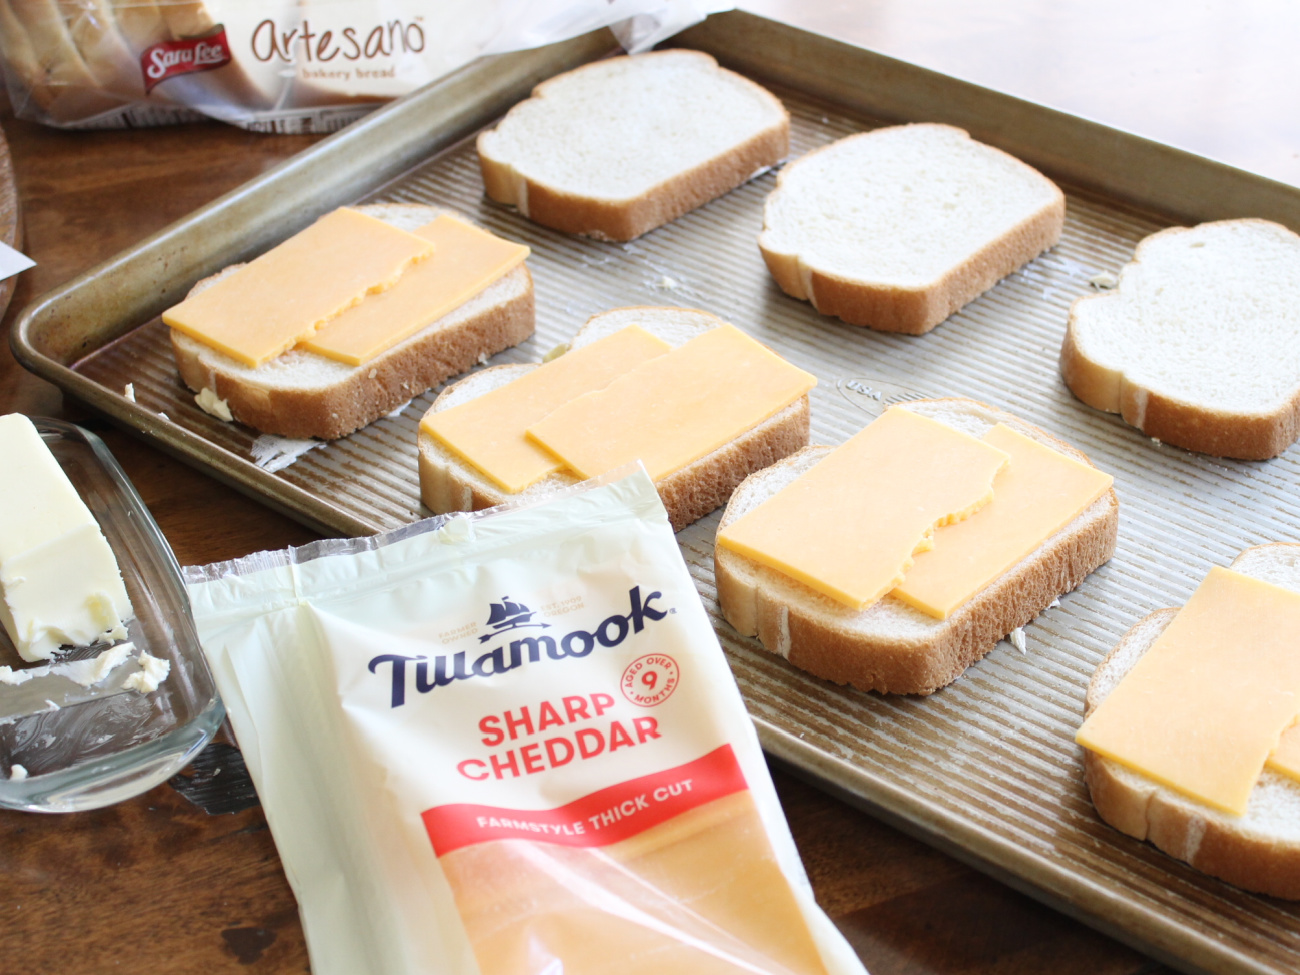 Serve Up A Delicious Grilled Cheese Sandwich With Big Savings On Tillamook Cheese At Publix on I Heart Publix